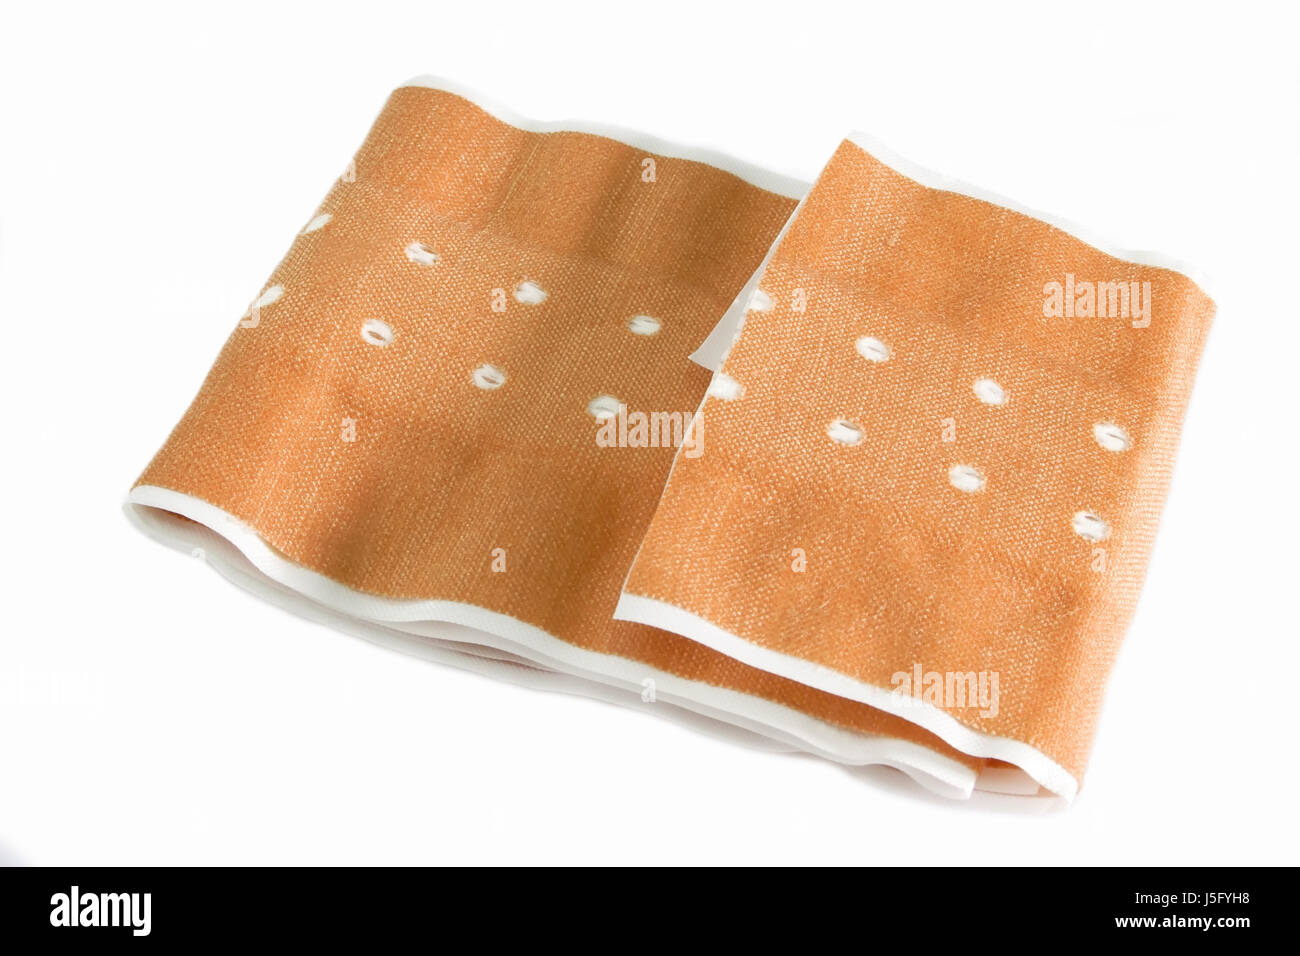 adhesive patches Stock Photo